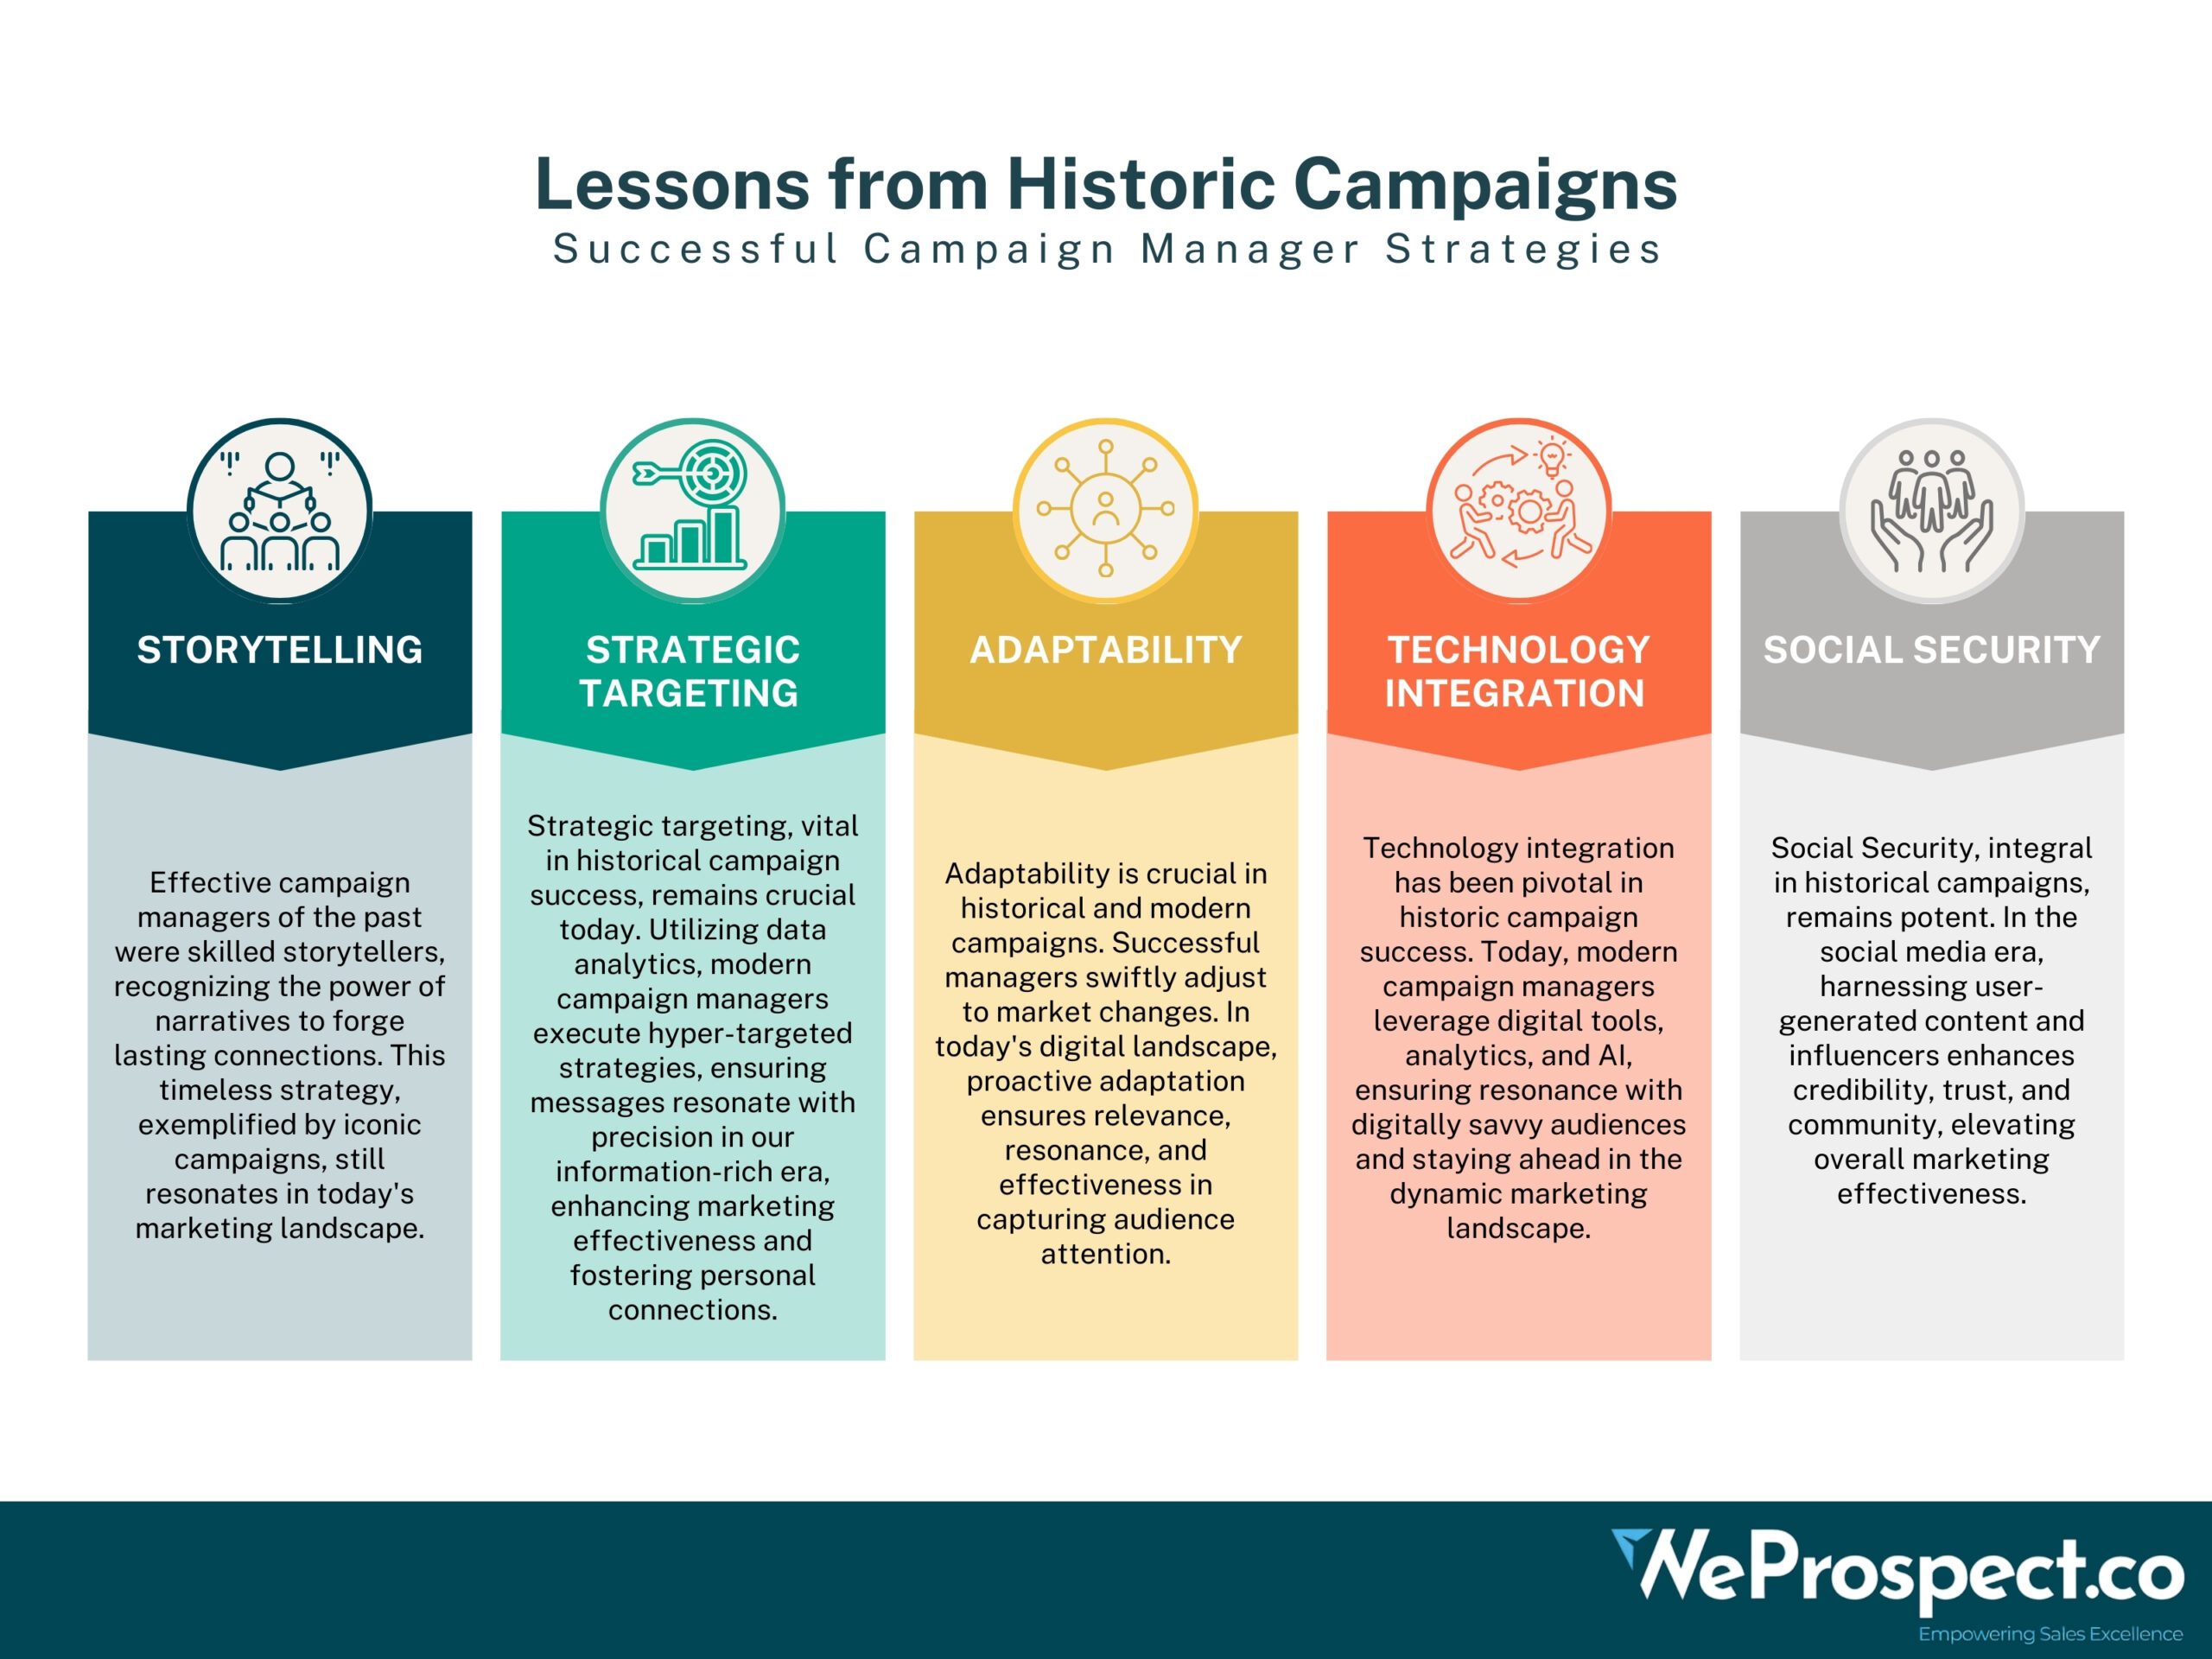 Lessons from Historic Campaigns: Analyzing Successful Campaign Manager Strategies